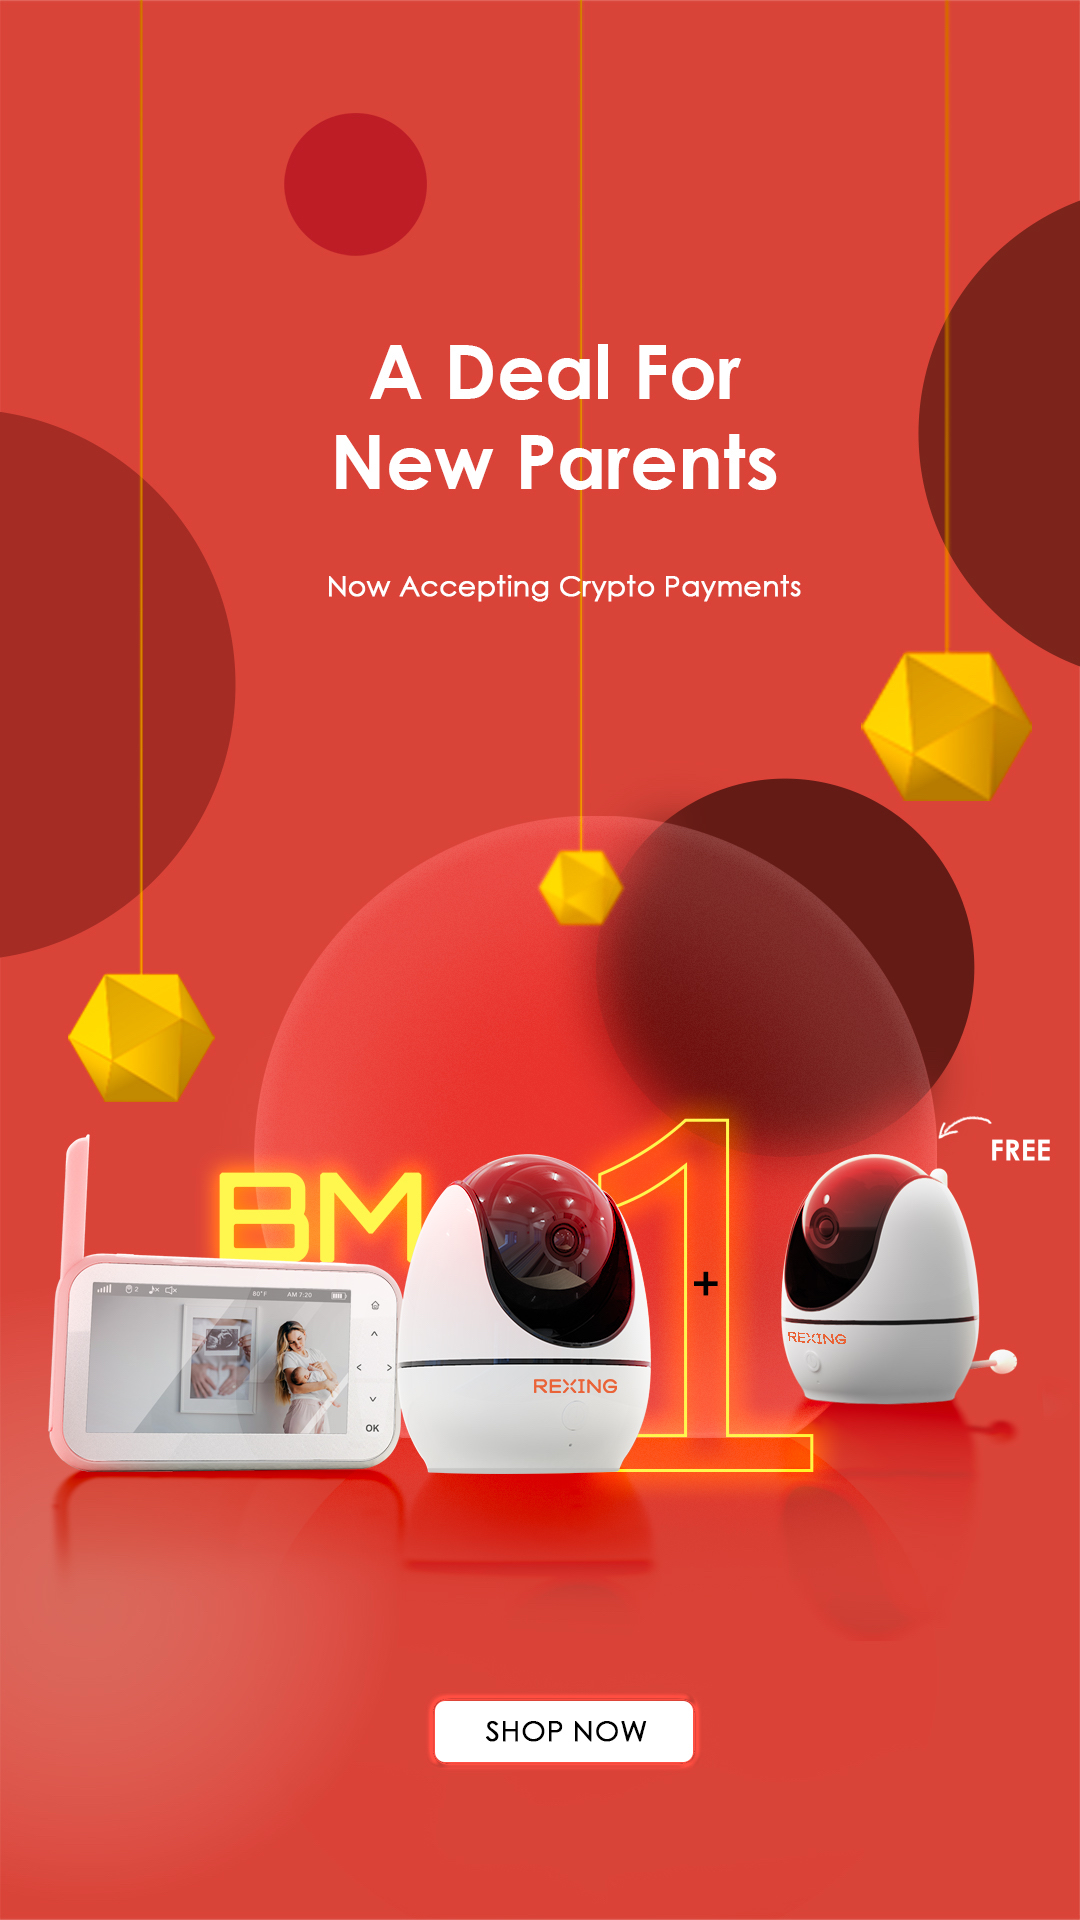 Rexing BM1 + Free Extra Add-on Baby Camera, Baby Monitor w/ Recording Capabilities 720p Video/Audio